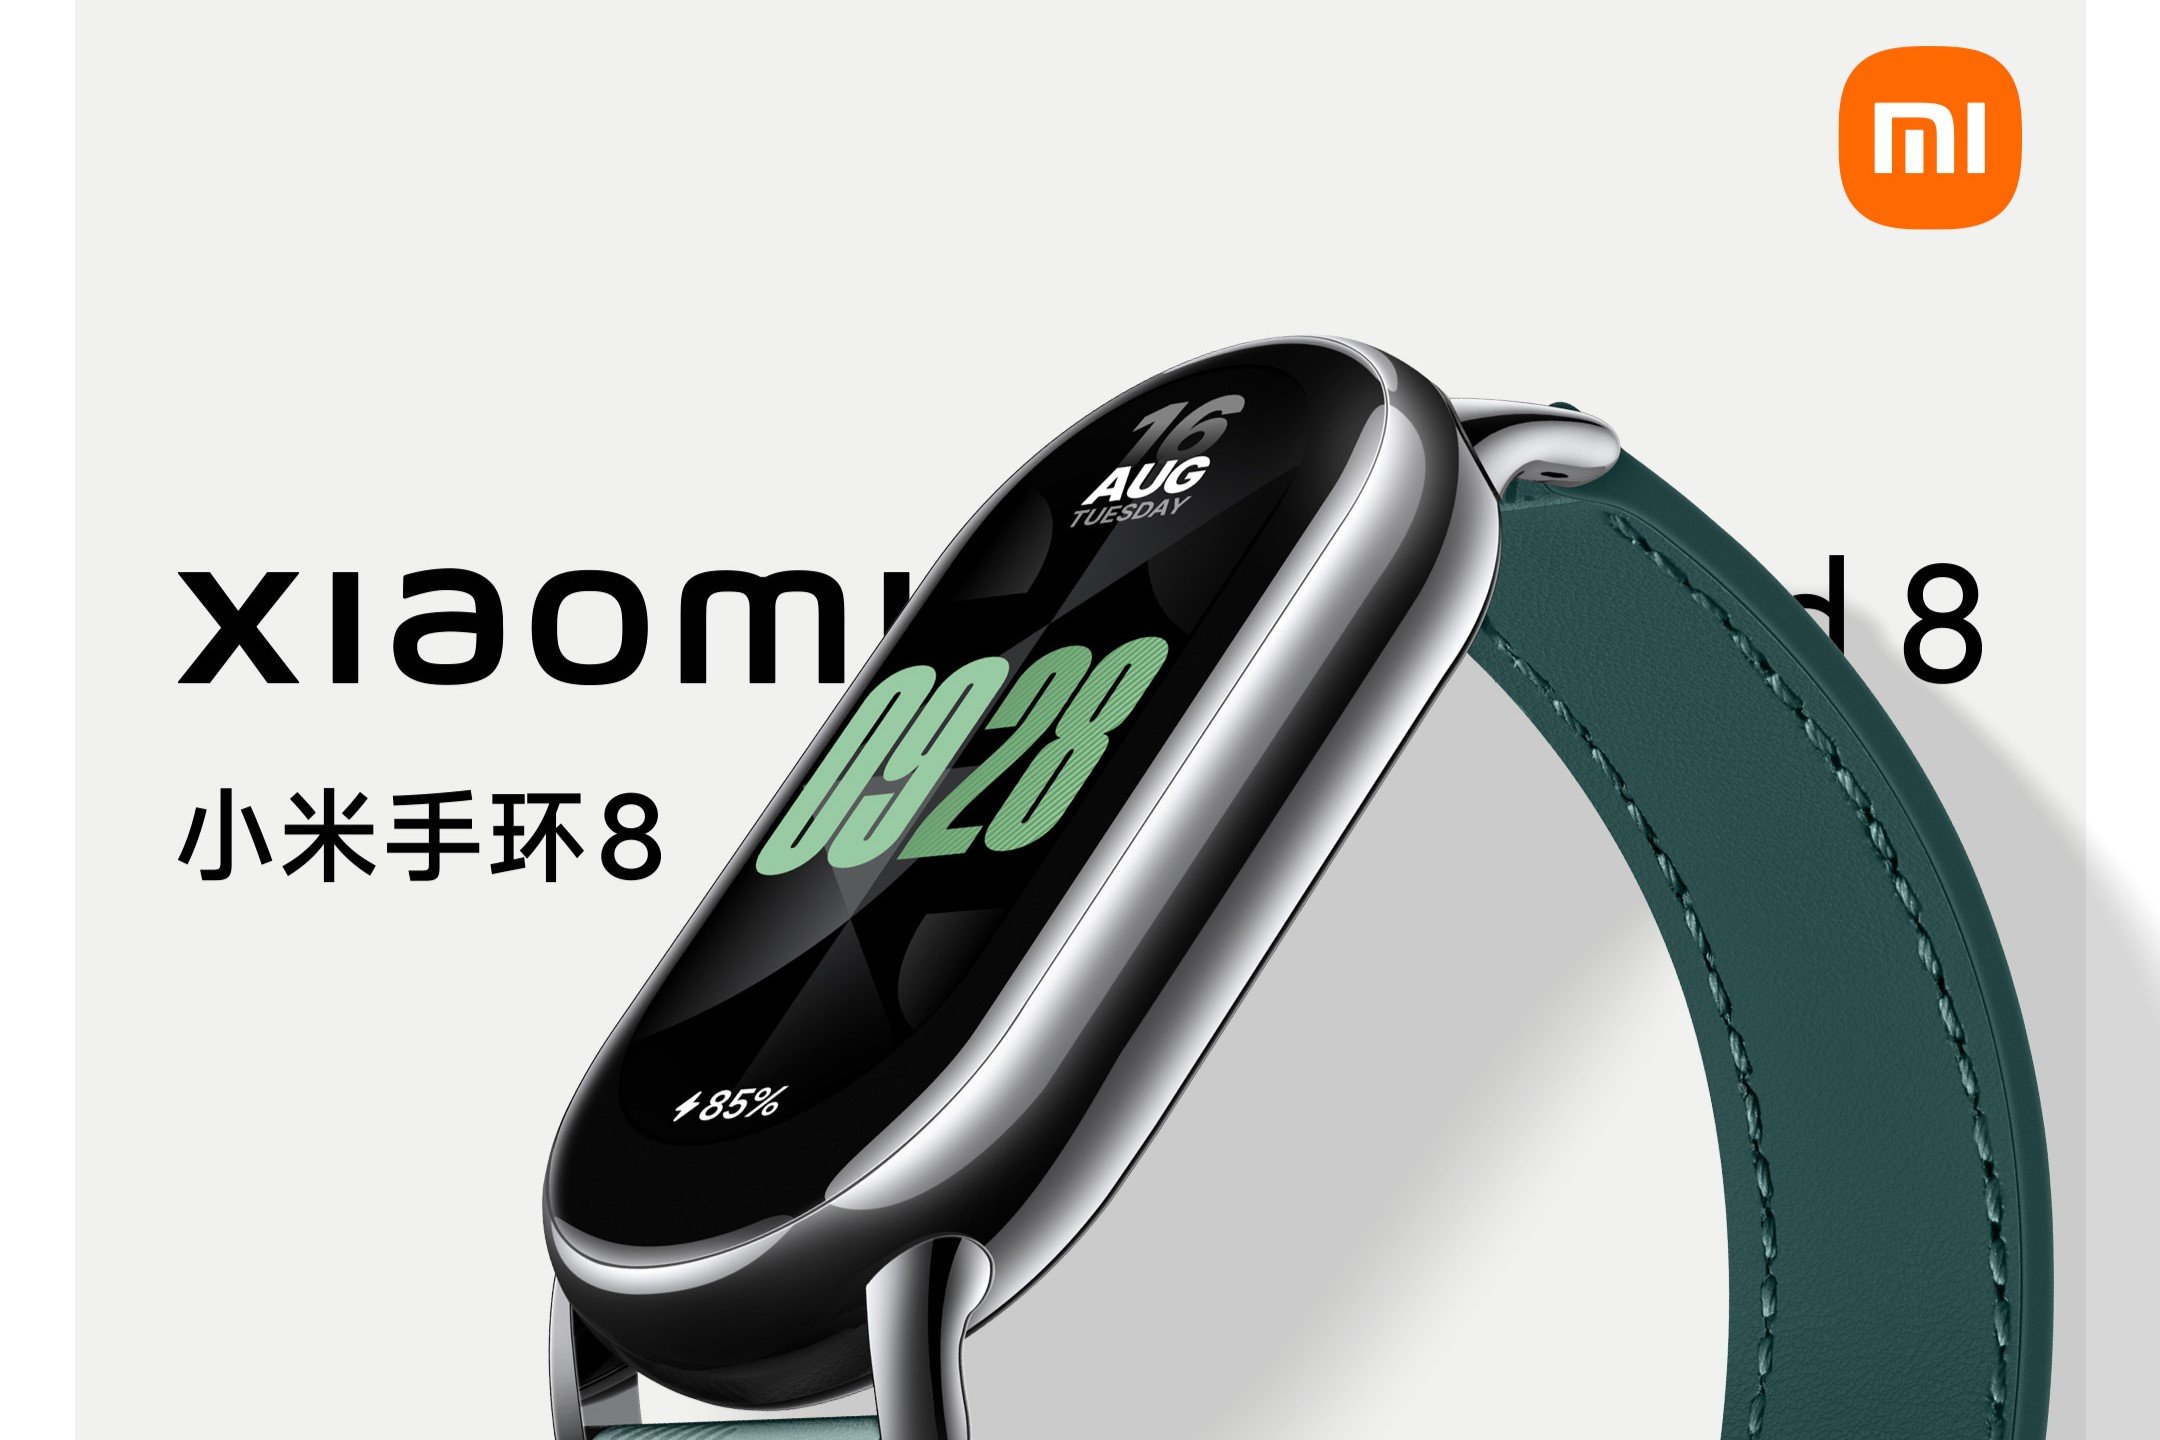 Strap for Mi Band 8 Bracelet for Xiaomi Smart Band 8 NFC Global